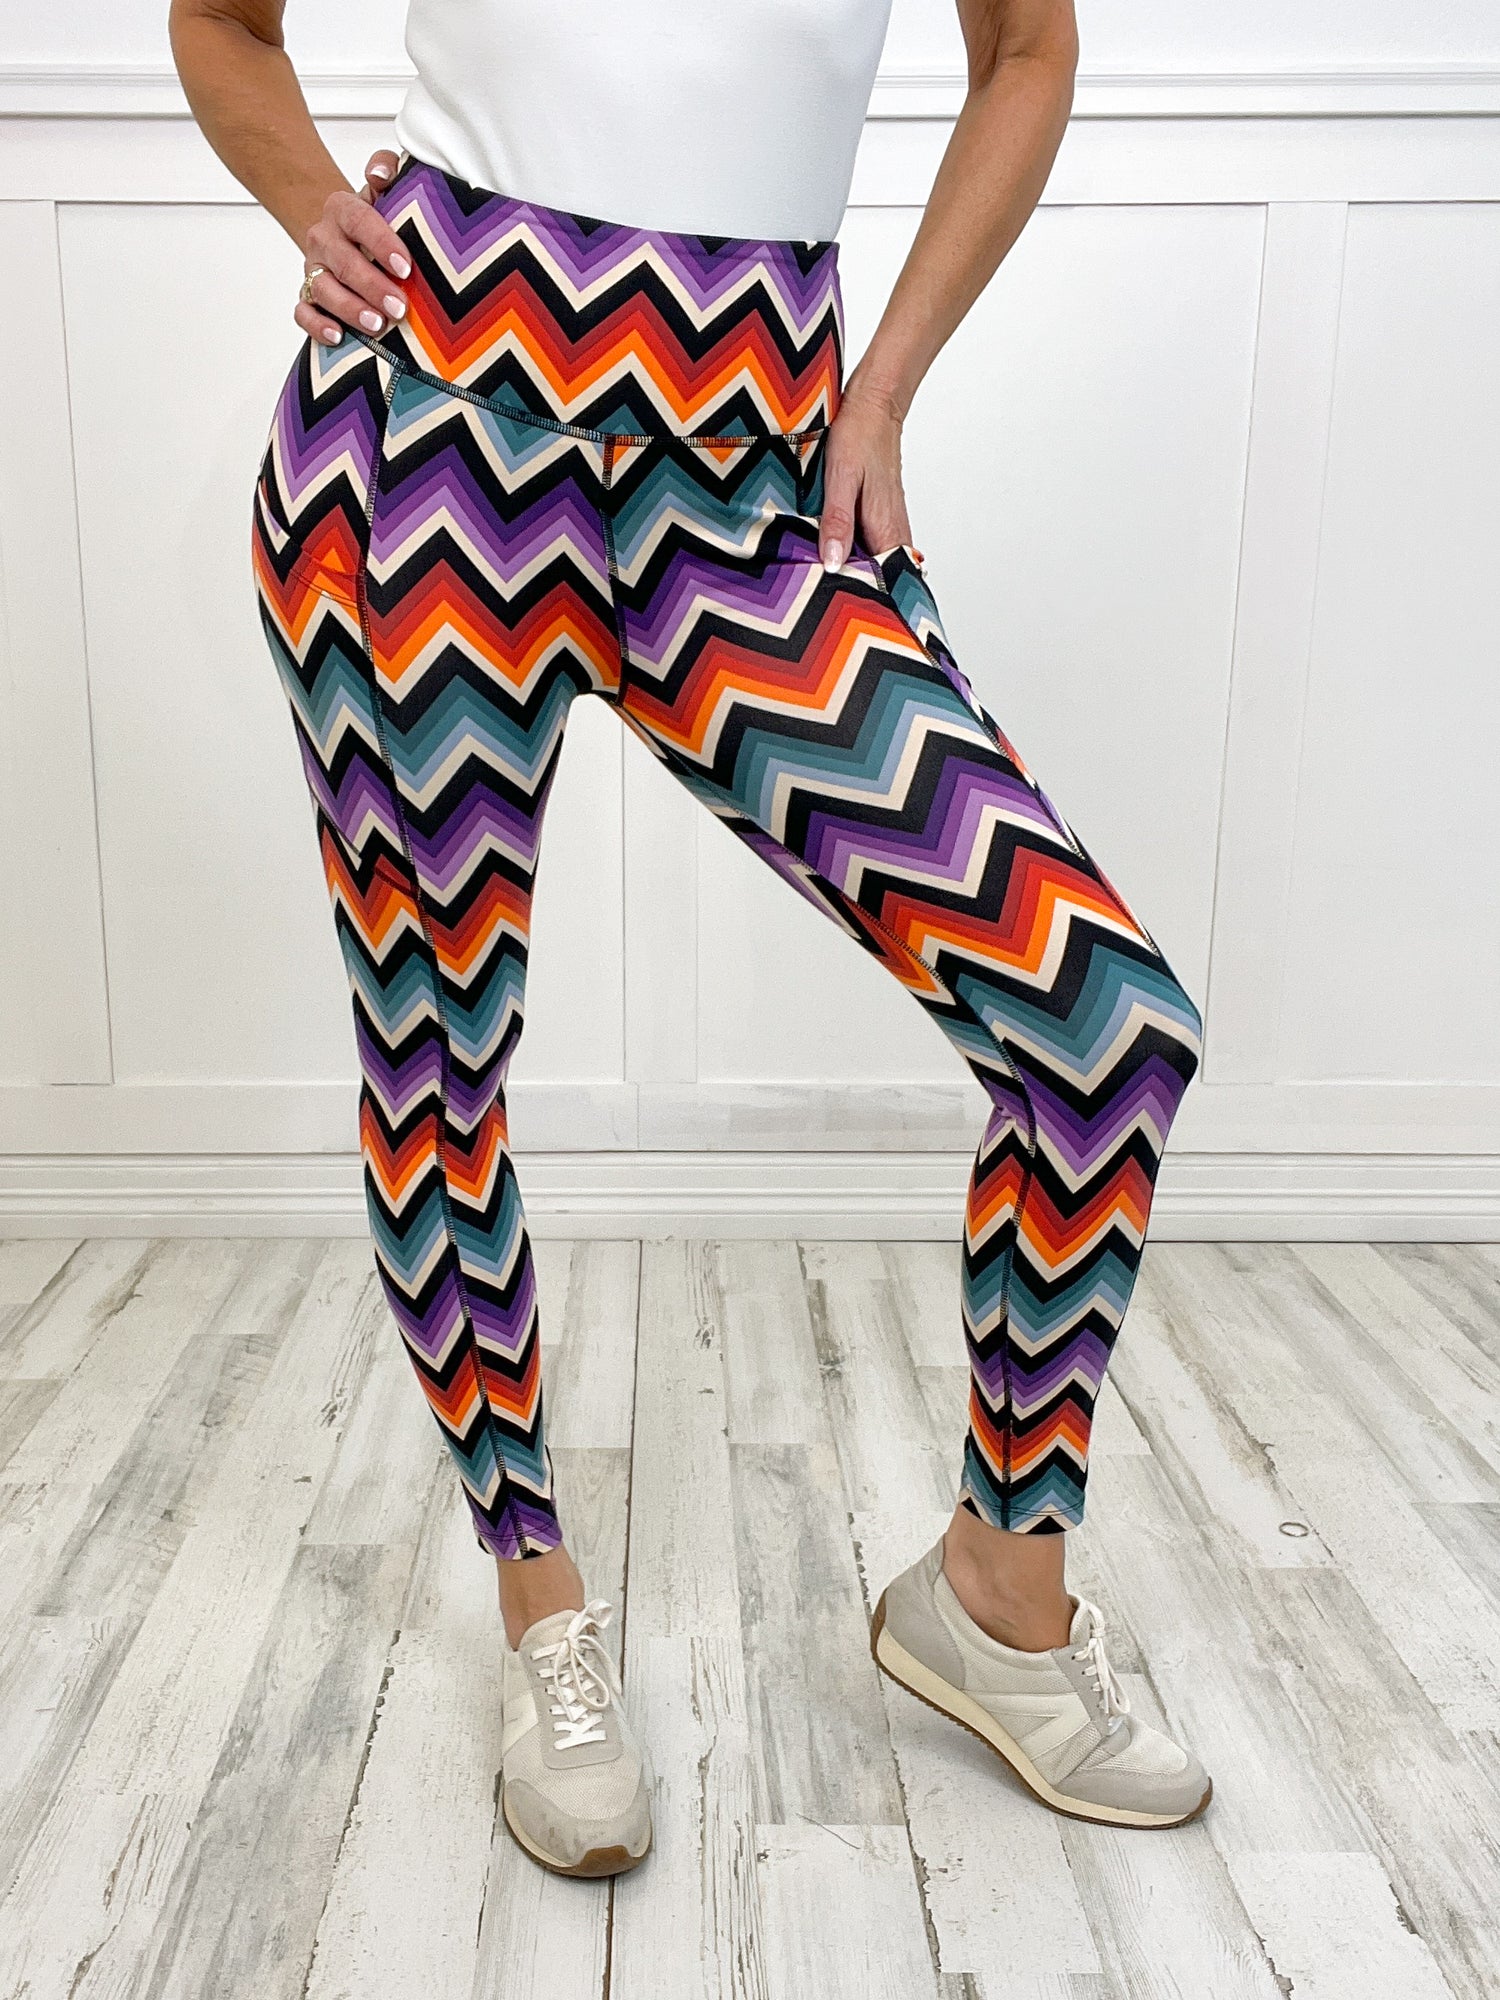 Eluminary Casualetic Leggings with Pockets